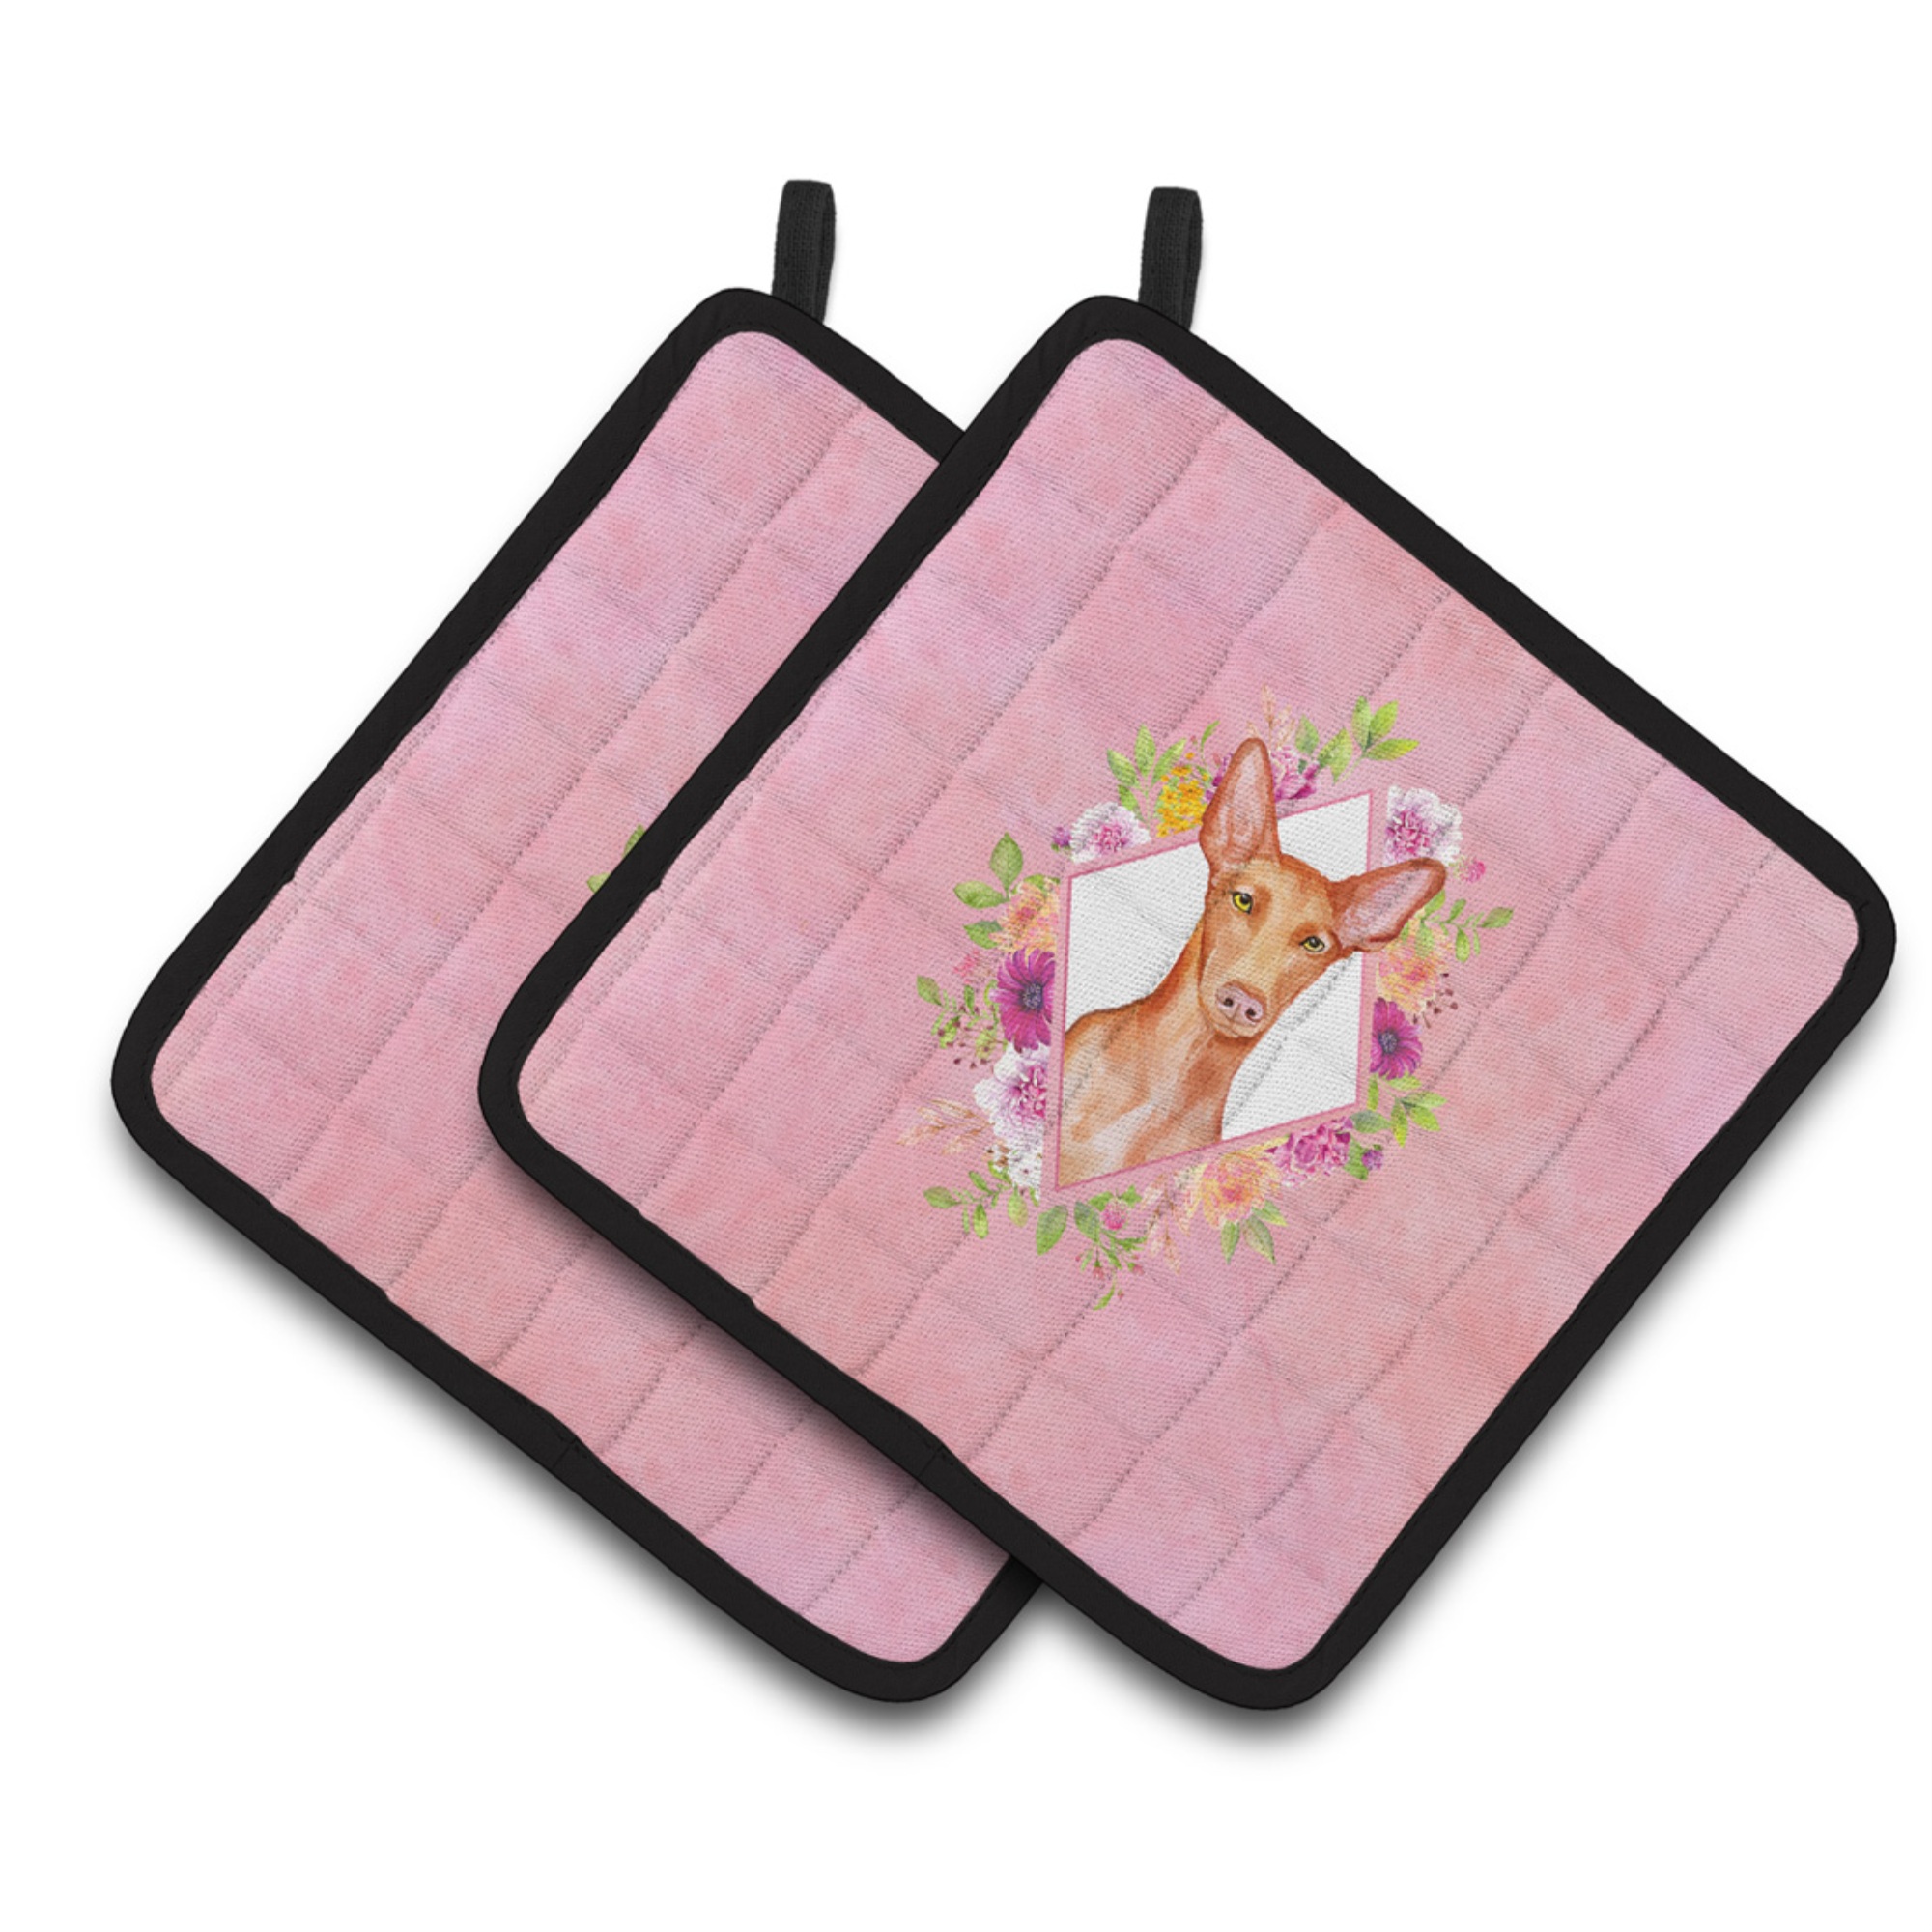 Caroline's Treasures "Caroline's Treasures CK4168PTHD Pharaoh Hound Pink Flowers Pair of Pot Holders potholders, Multicolor"